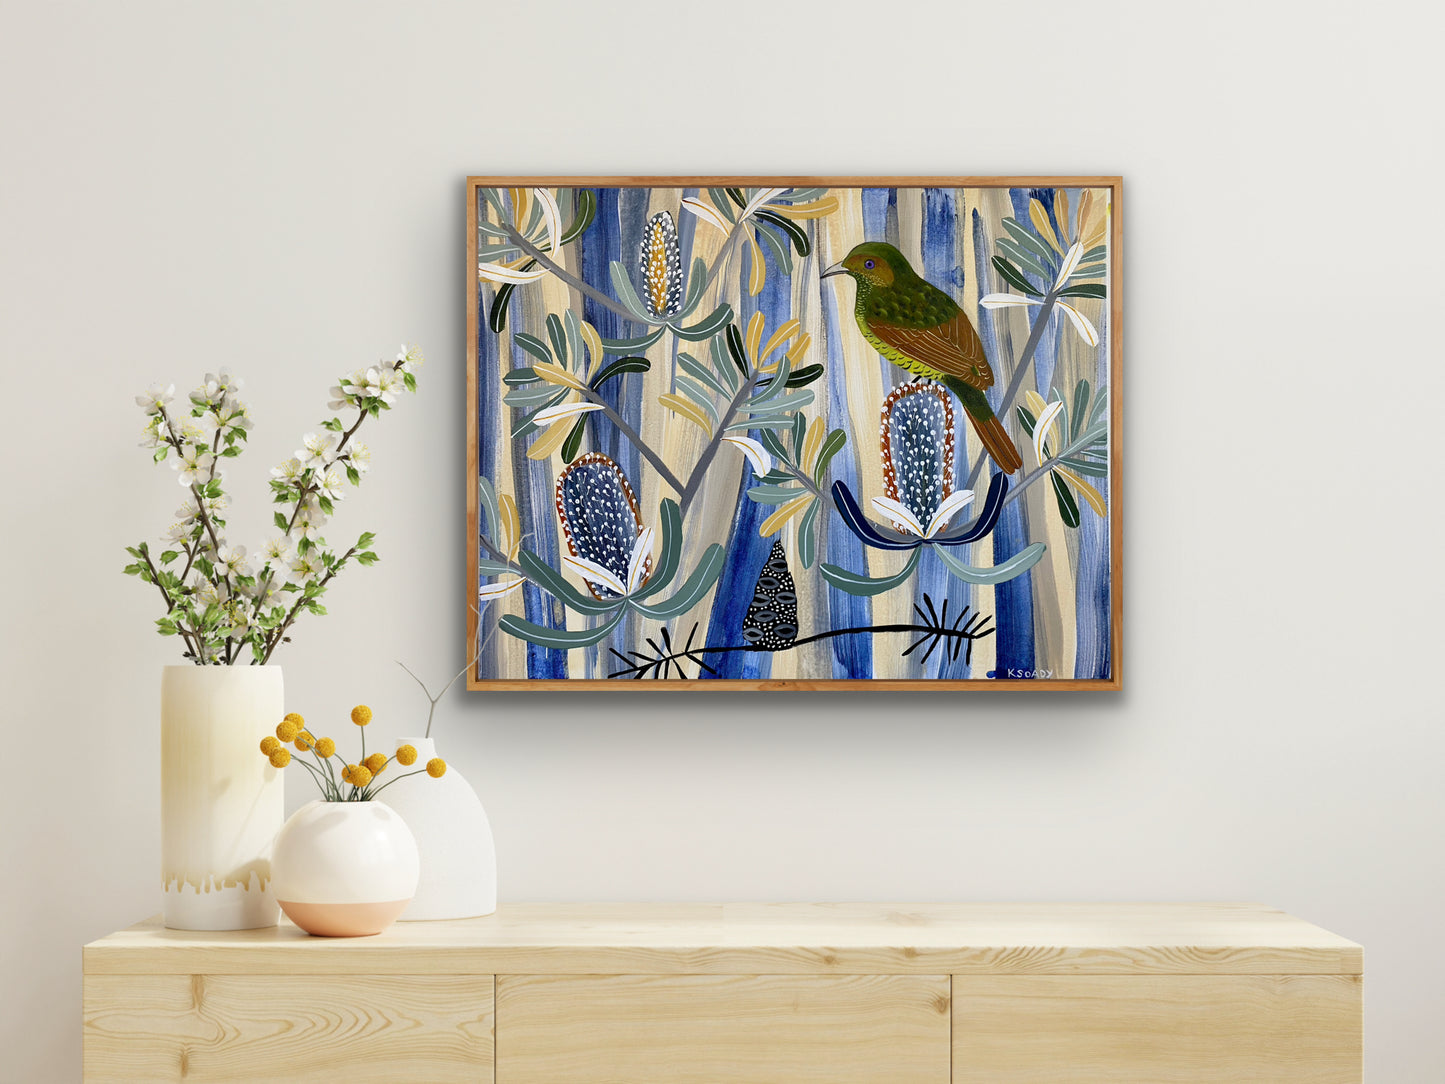 Bowerbird and the Banksia